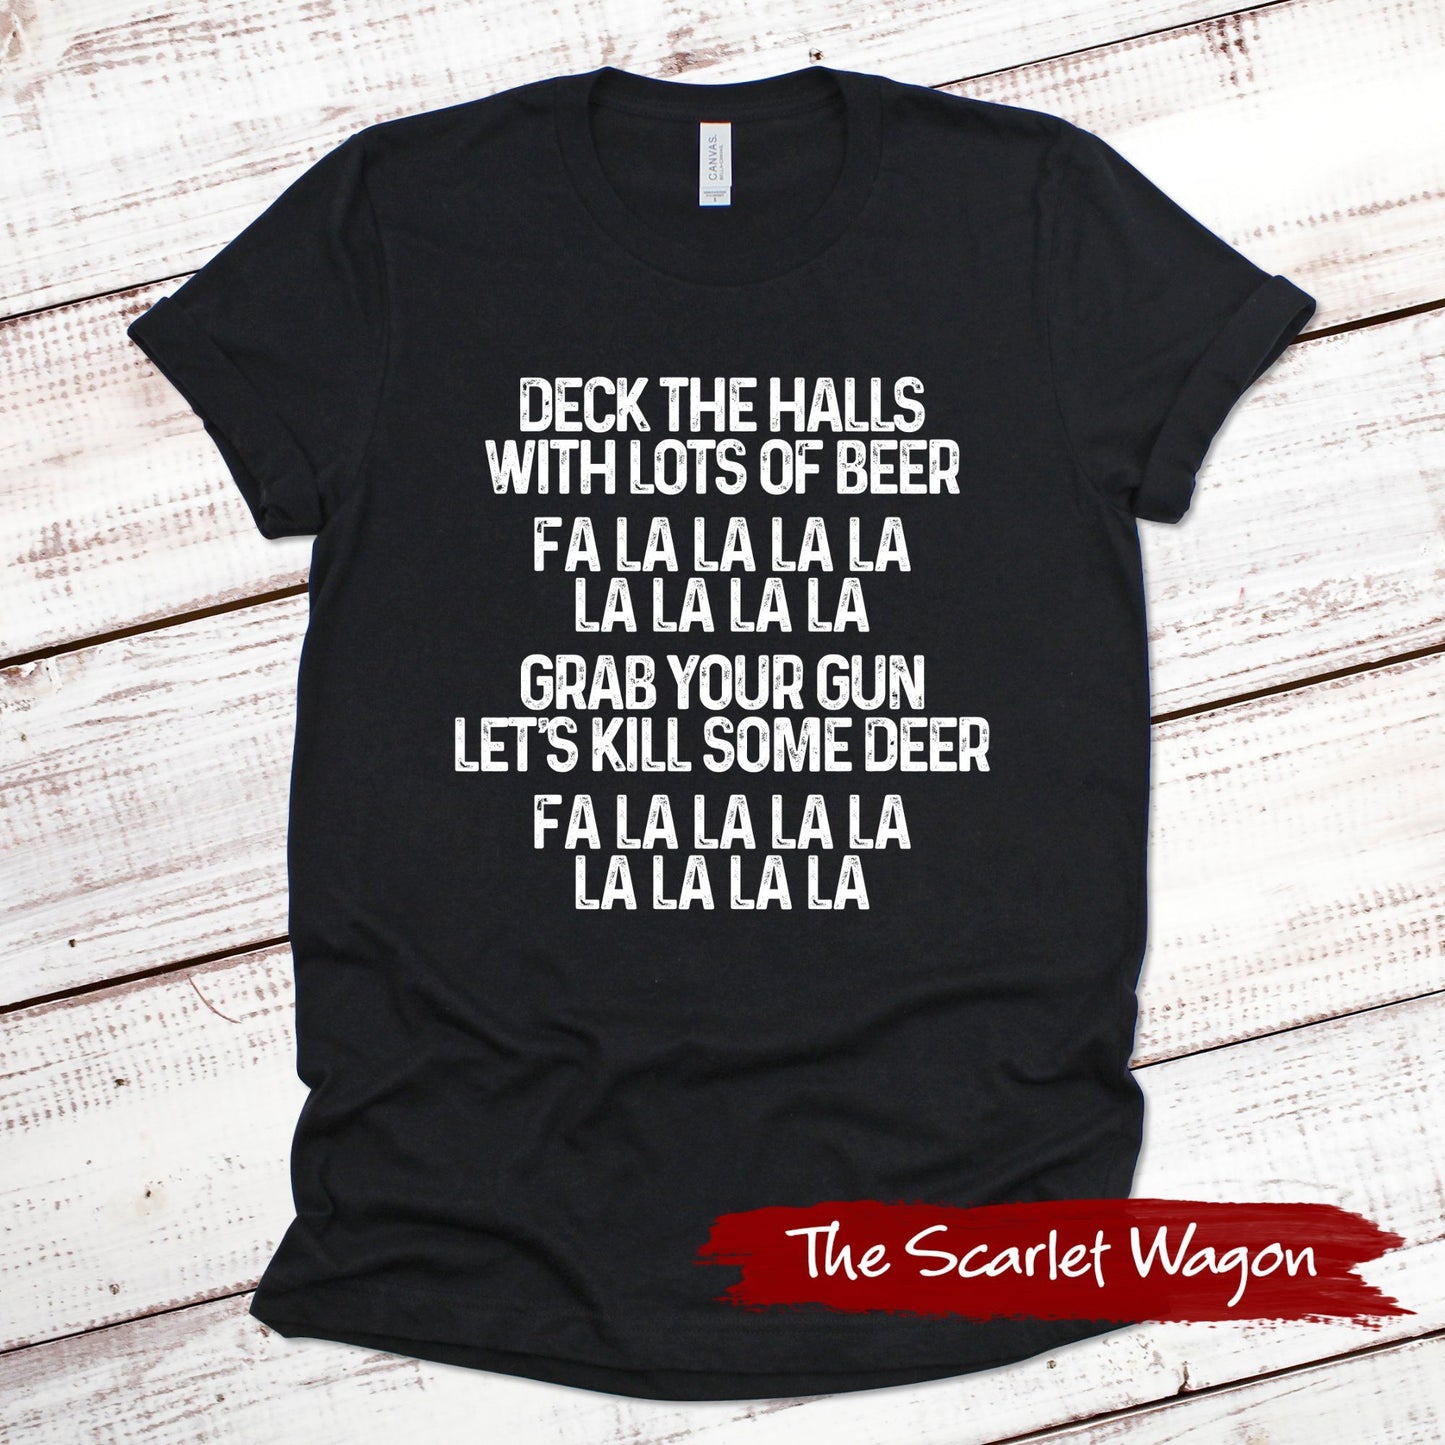 Deck the Halls with Lots of Beer Christmas Shirt Scarlet Wagon Black XS 